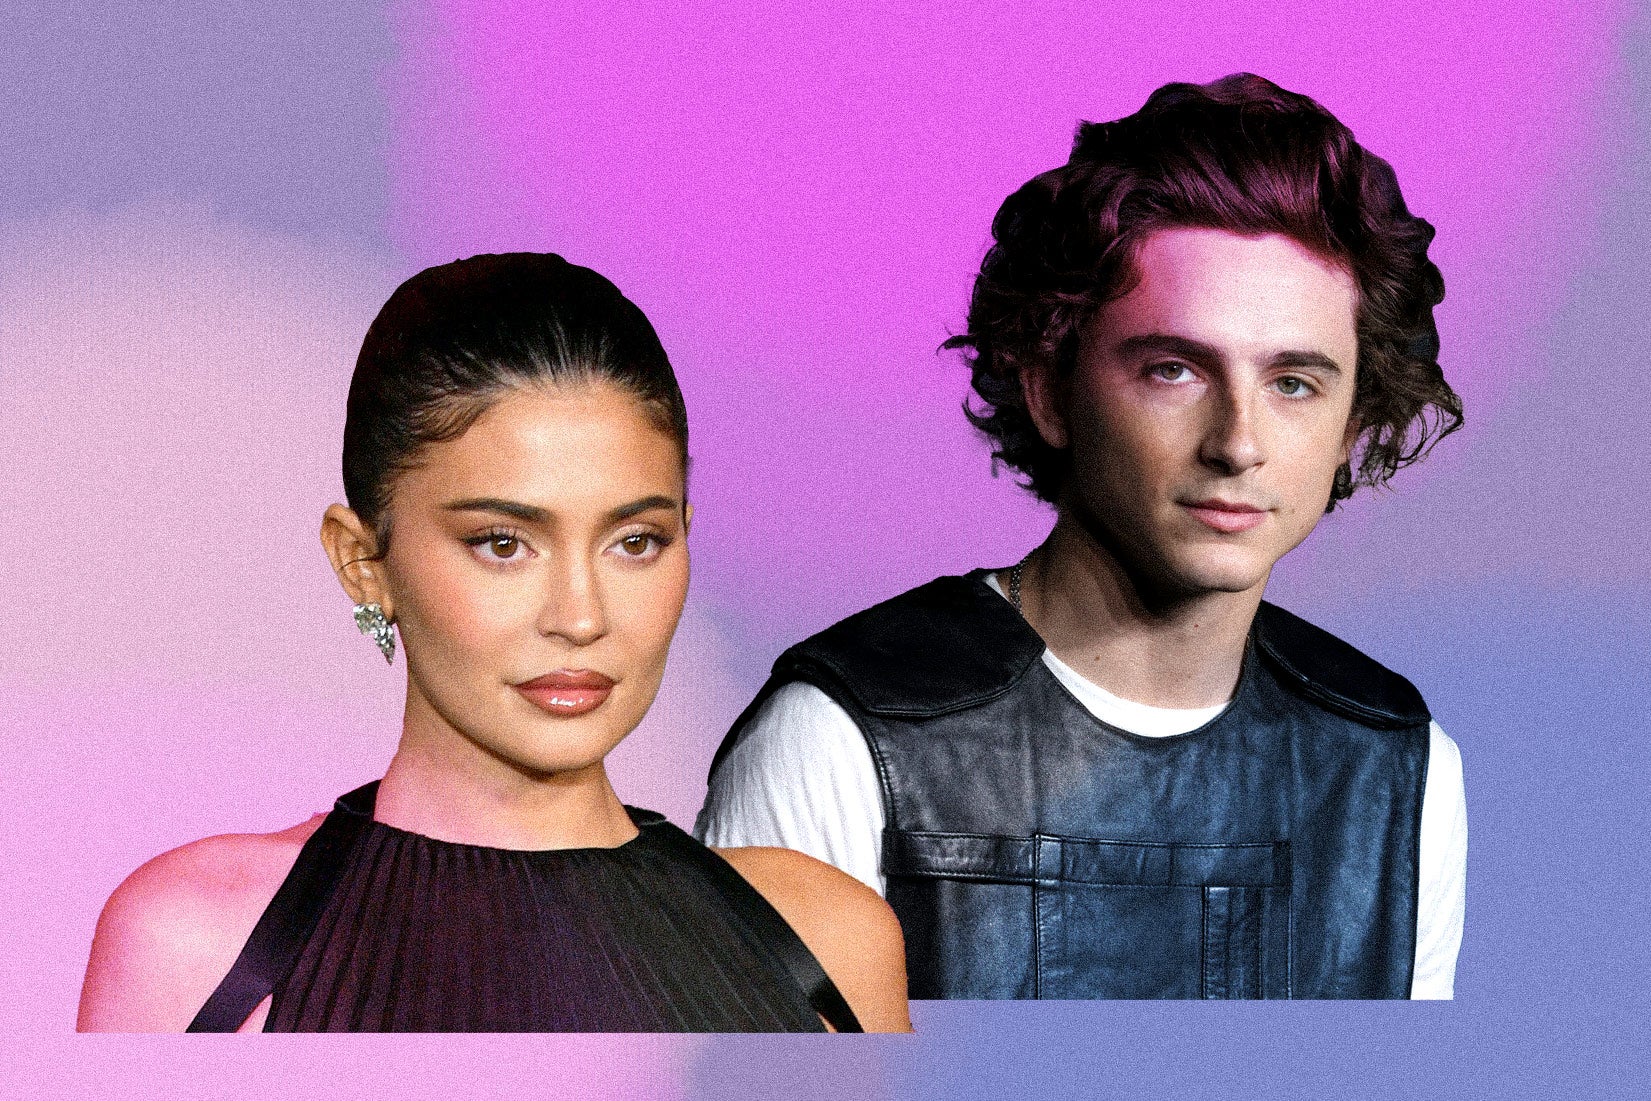 Kylie Jenner, Timothee Chalamet take romance to next level with